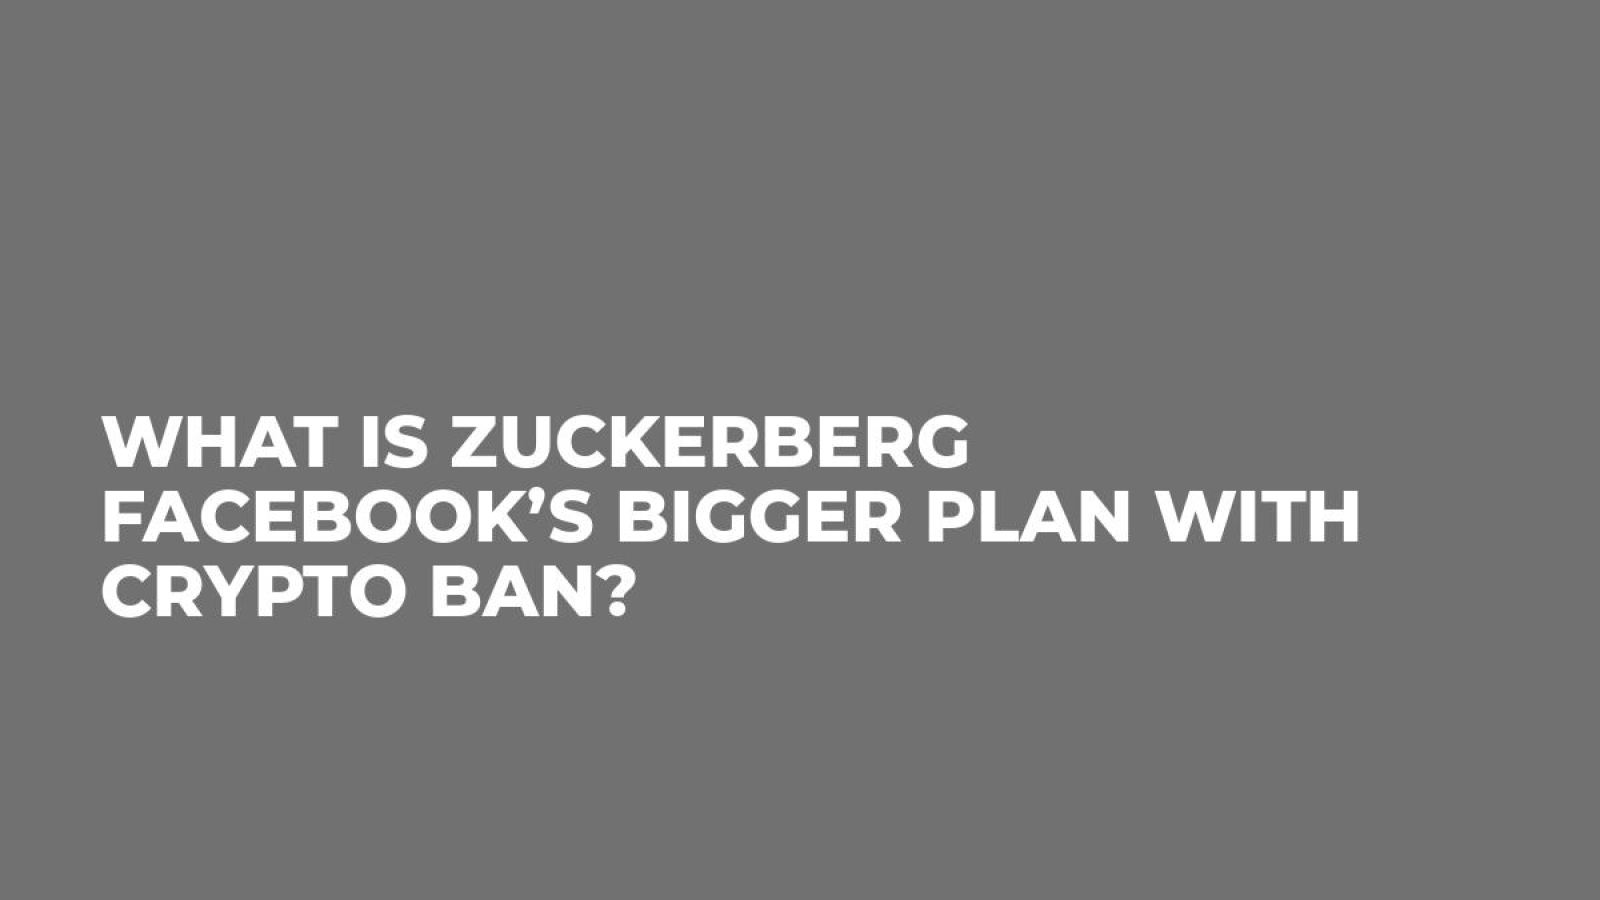 What is Zuckerberg Facebook’s Bigger Plan With Crypto Ban?